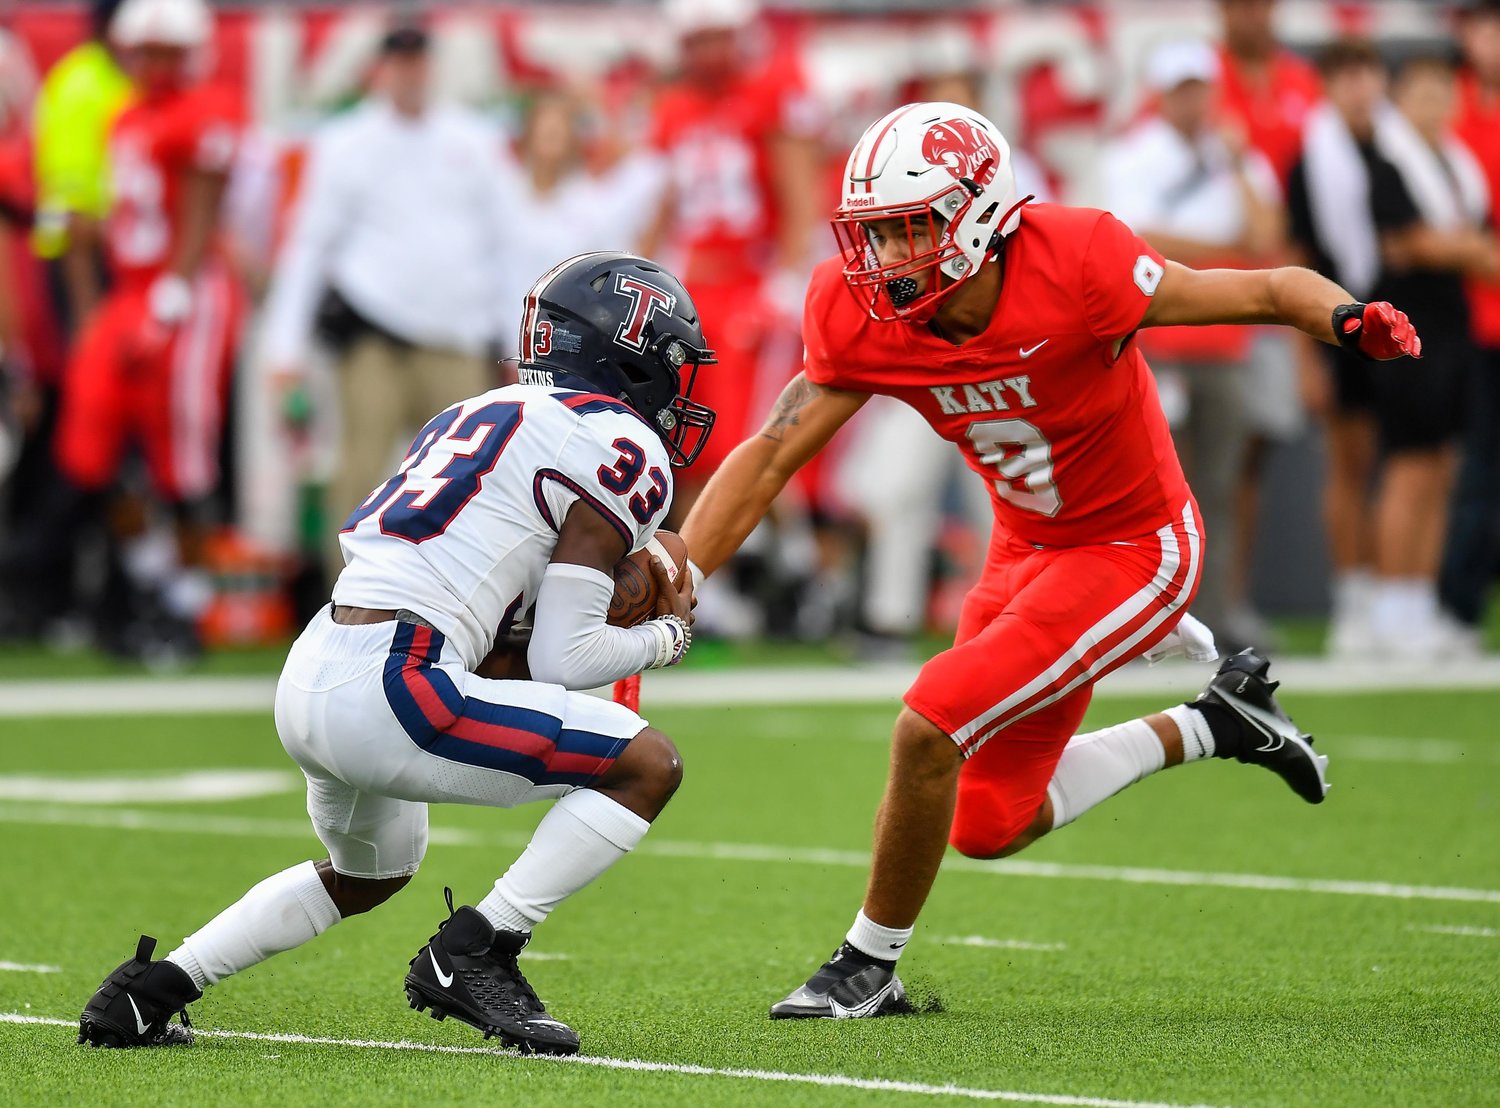 Katy, Tx. Oct. 1, 2021: Katy's #9 Antonio Silva makes the stop on Tompkins #33 Julius Mourning during a game between Katy Tigers and Tompkins Falcons at Legacy Stadium in Katy. (Photo by Mark Goodman / Katy Times)